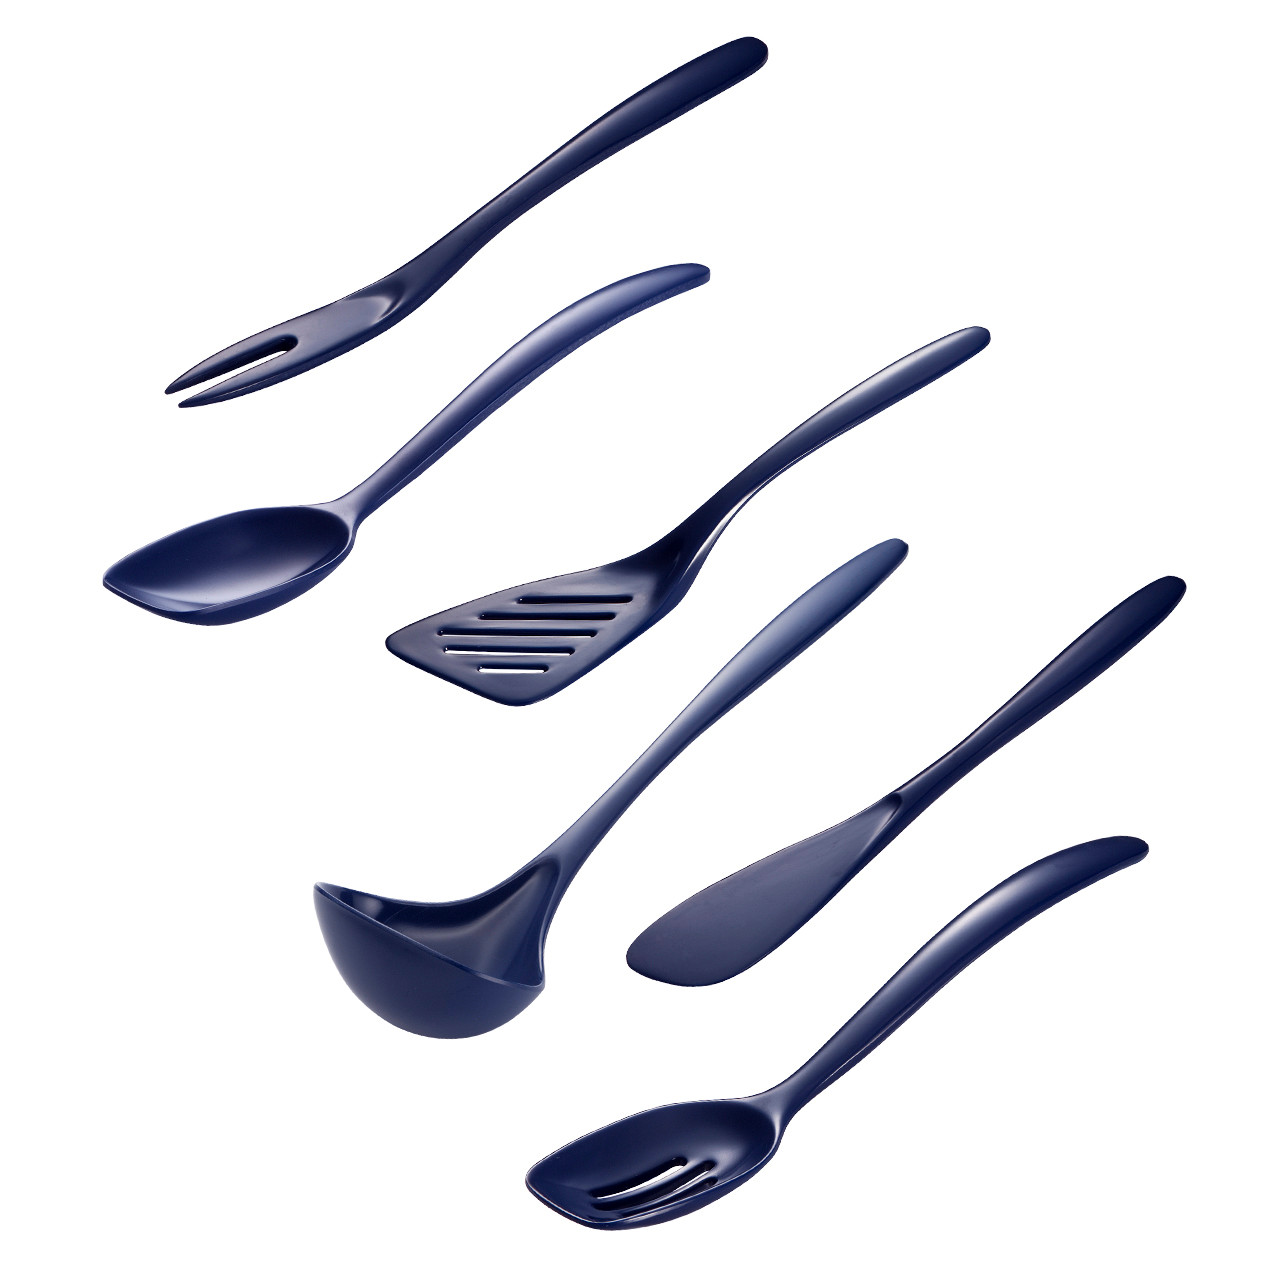 American Made Kitchen Utensils and Housewares, Made in the USA by Hutzler